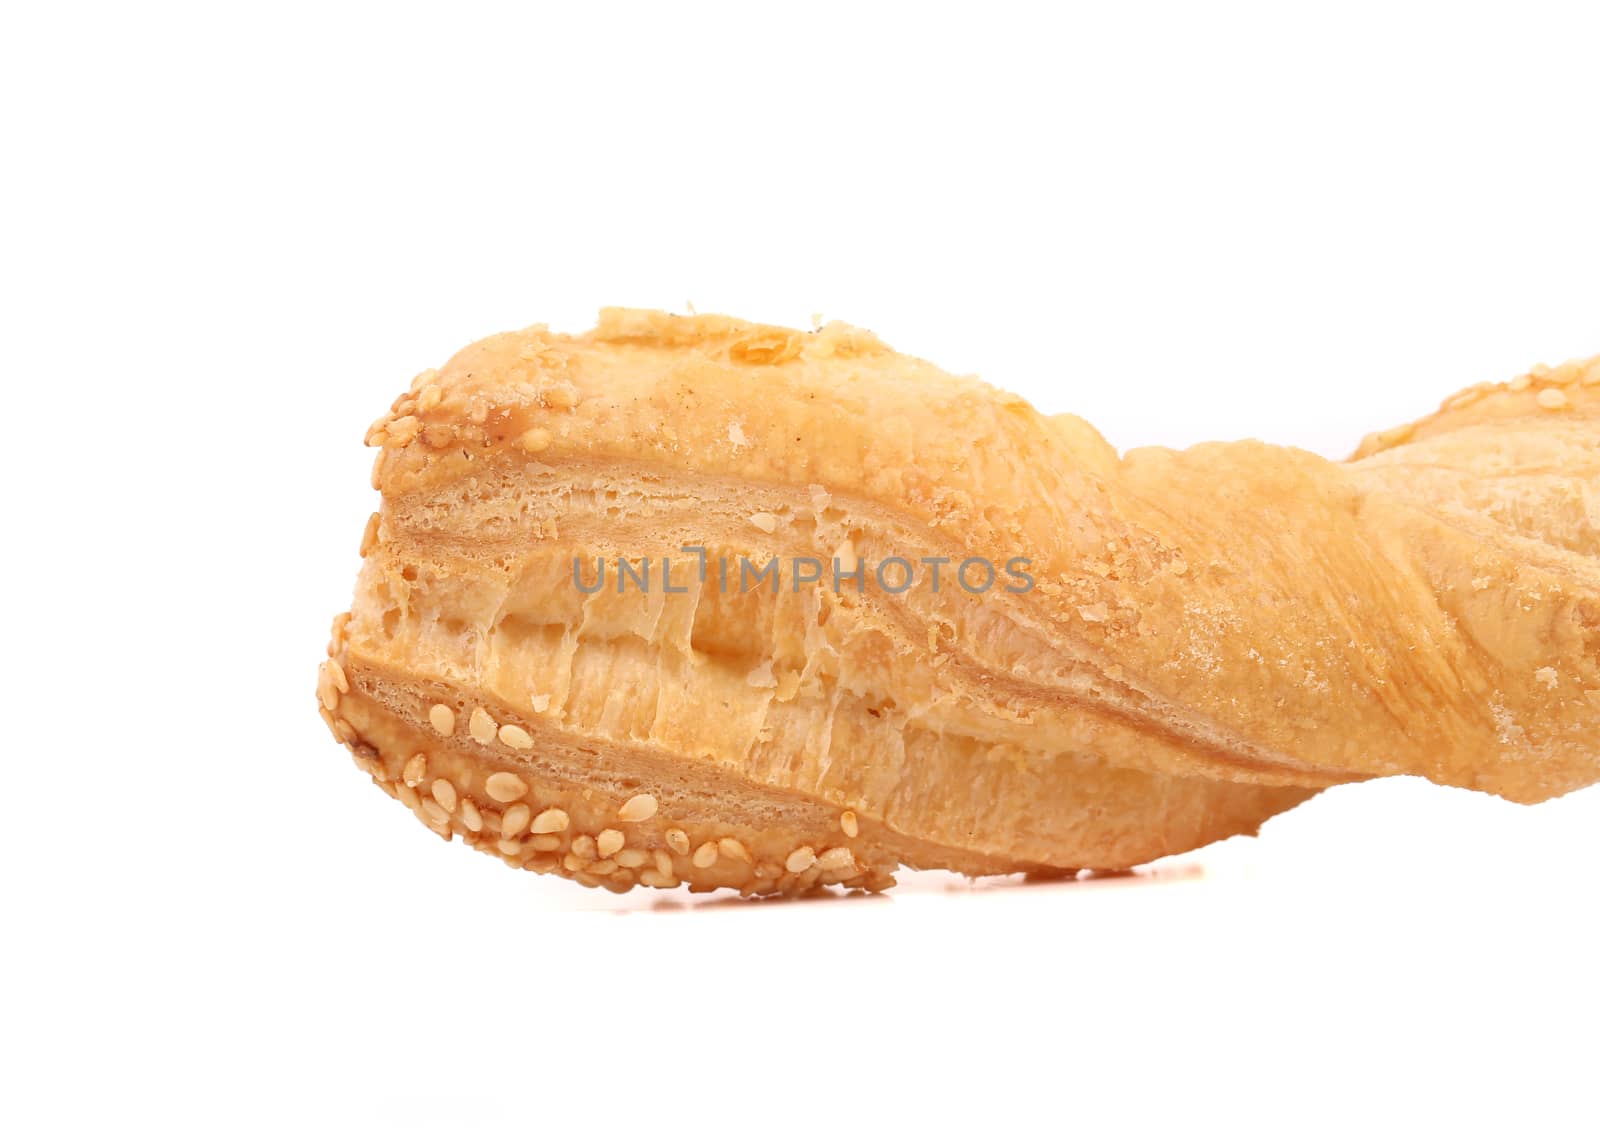 Cheese bread with seeds. Isolated on a white background.